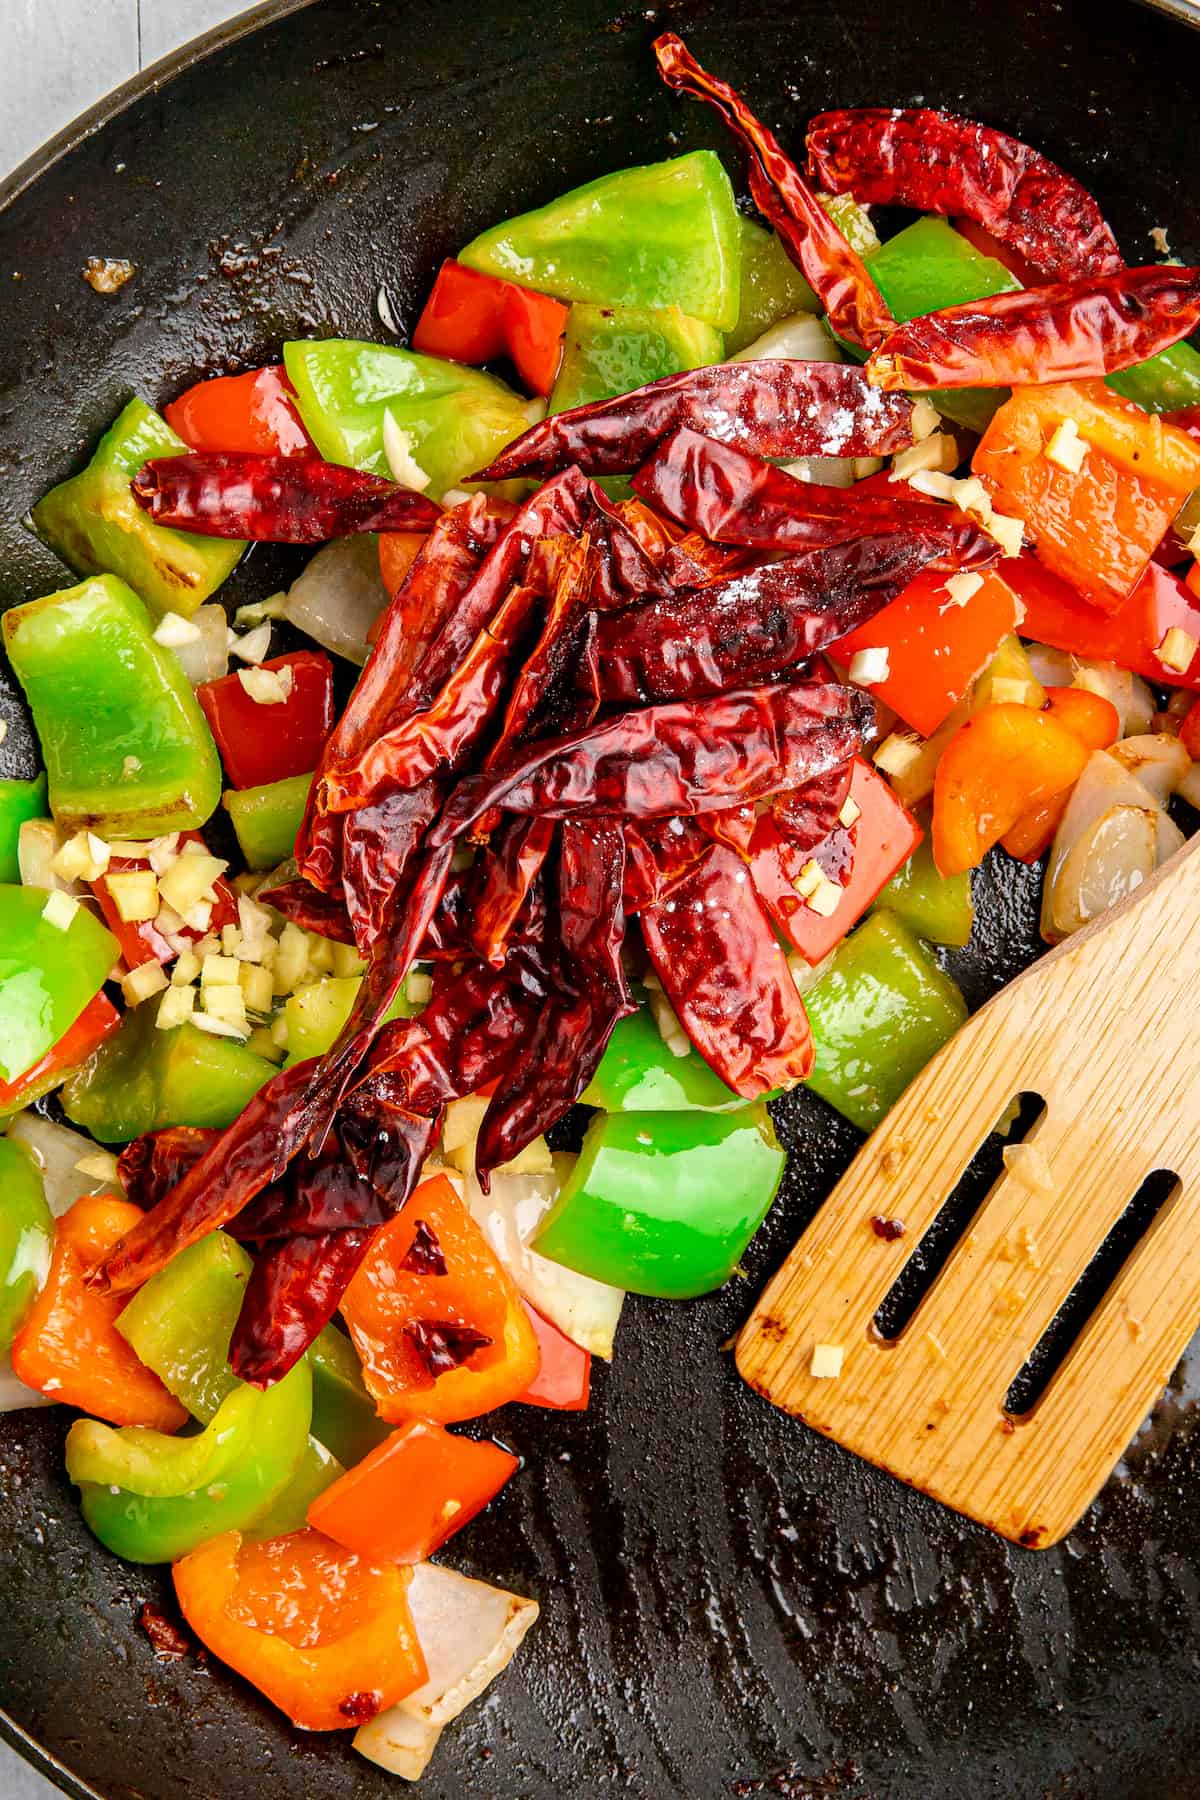 Chopped vegetables and dried chilies are sauteed in a pan.